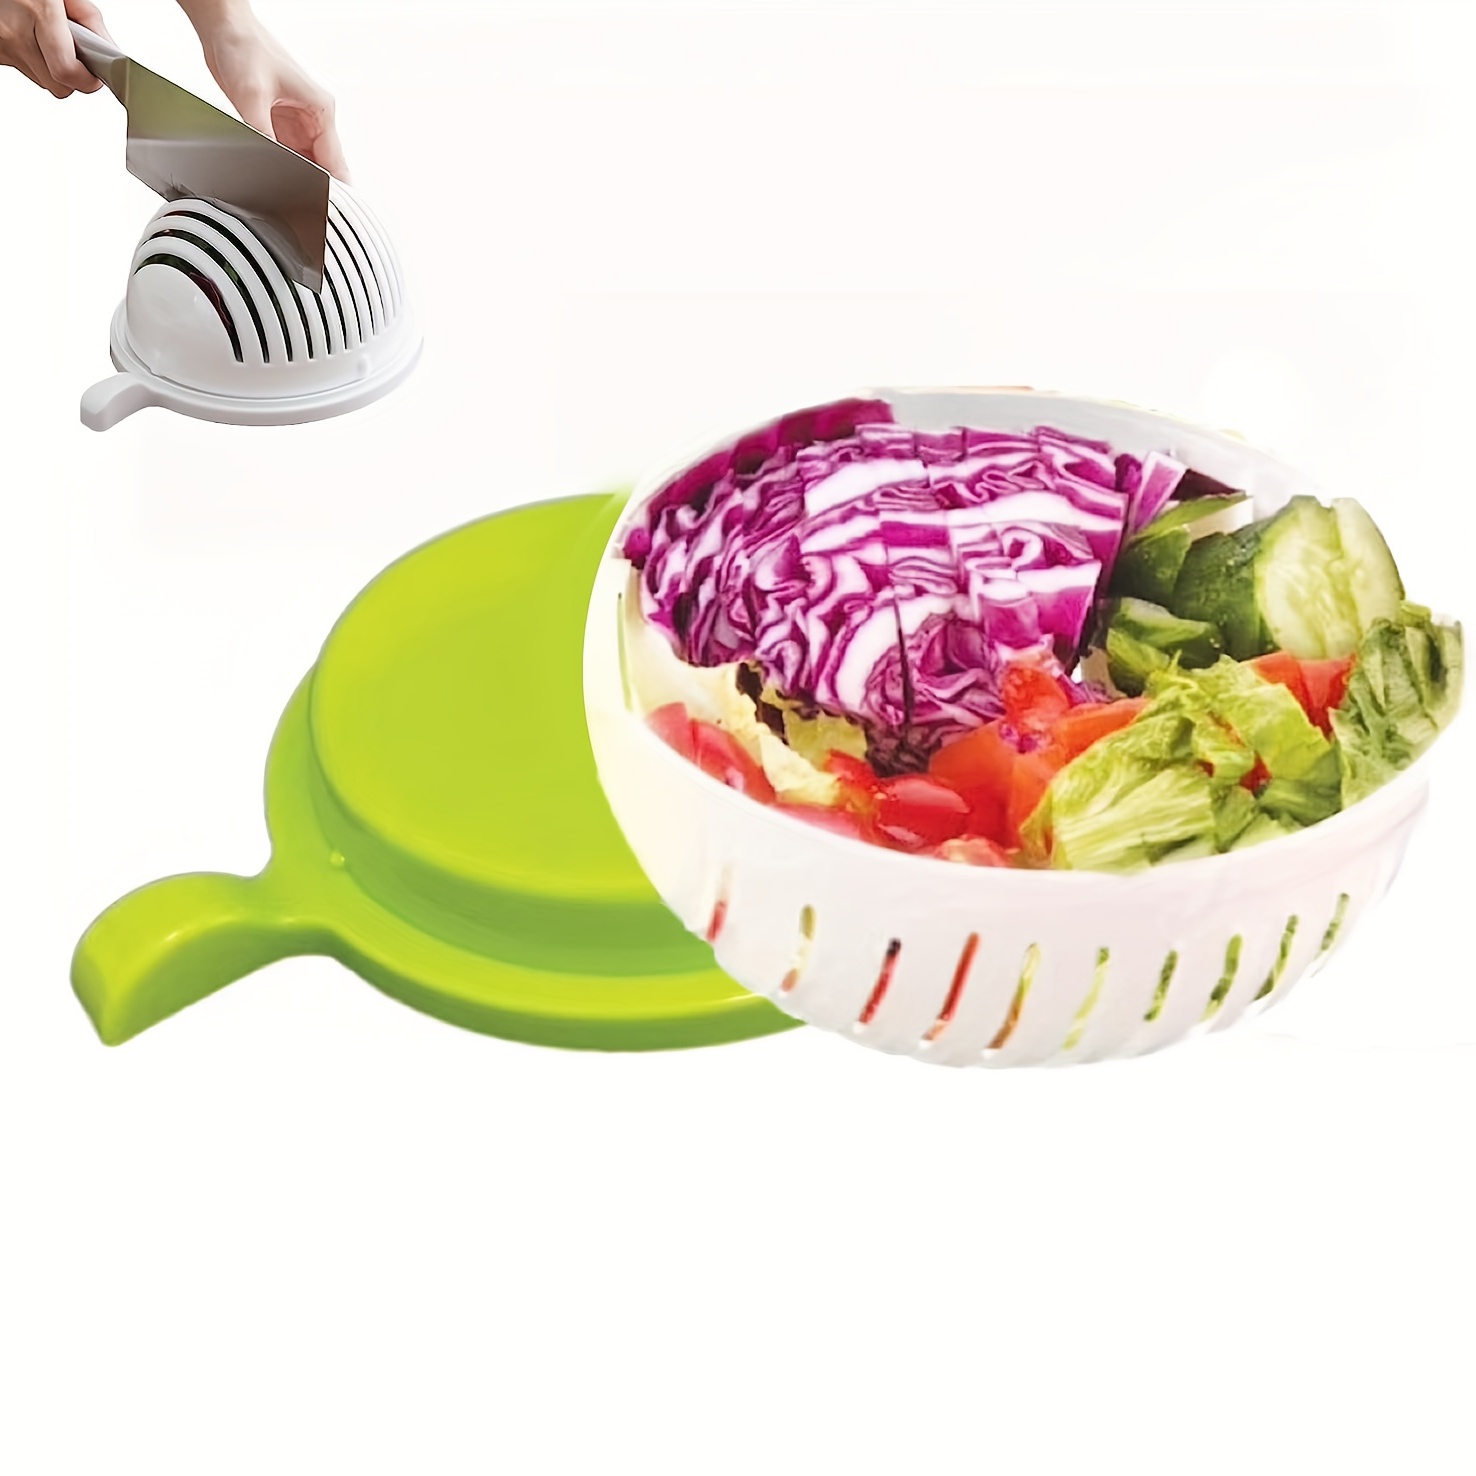 3 in 1 Snap Salad Cutter Bowl, 2Pcs Multi-Functional Fast Salad Chopper  Bowl and Cutter,60 Second Salad Cutter Veggie Choppers, Safe and Non-Toxic